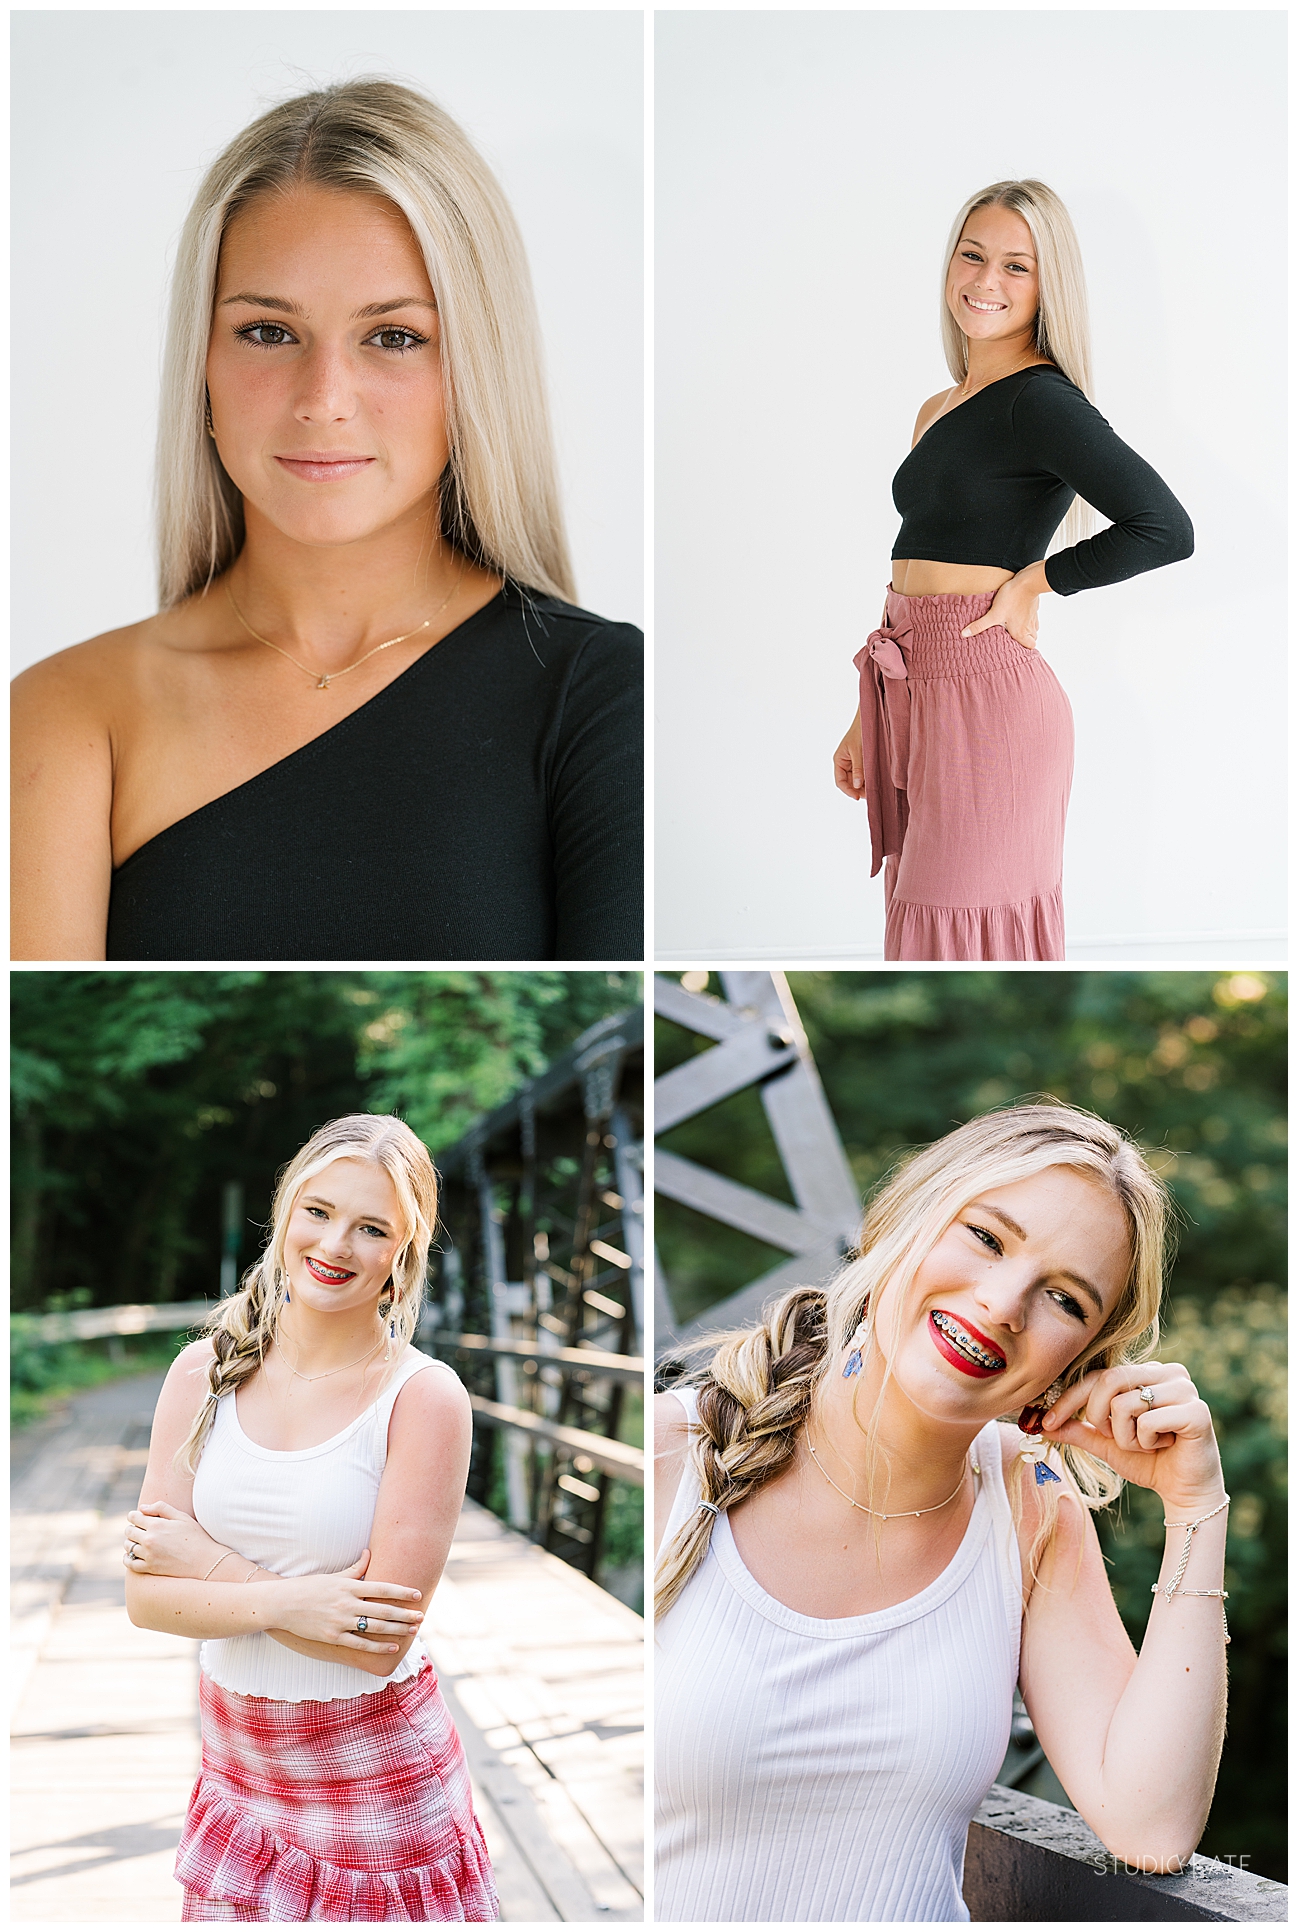 Studio Kate Senior sessions in Rome Georgia with Kate Walton. Tips for tan lines and sunburns during senior session. Pepperell high school senior photographer in Armuchee.